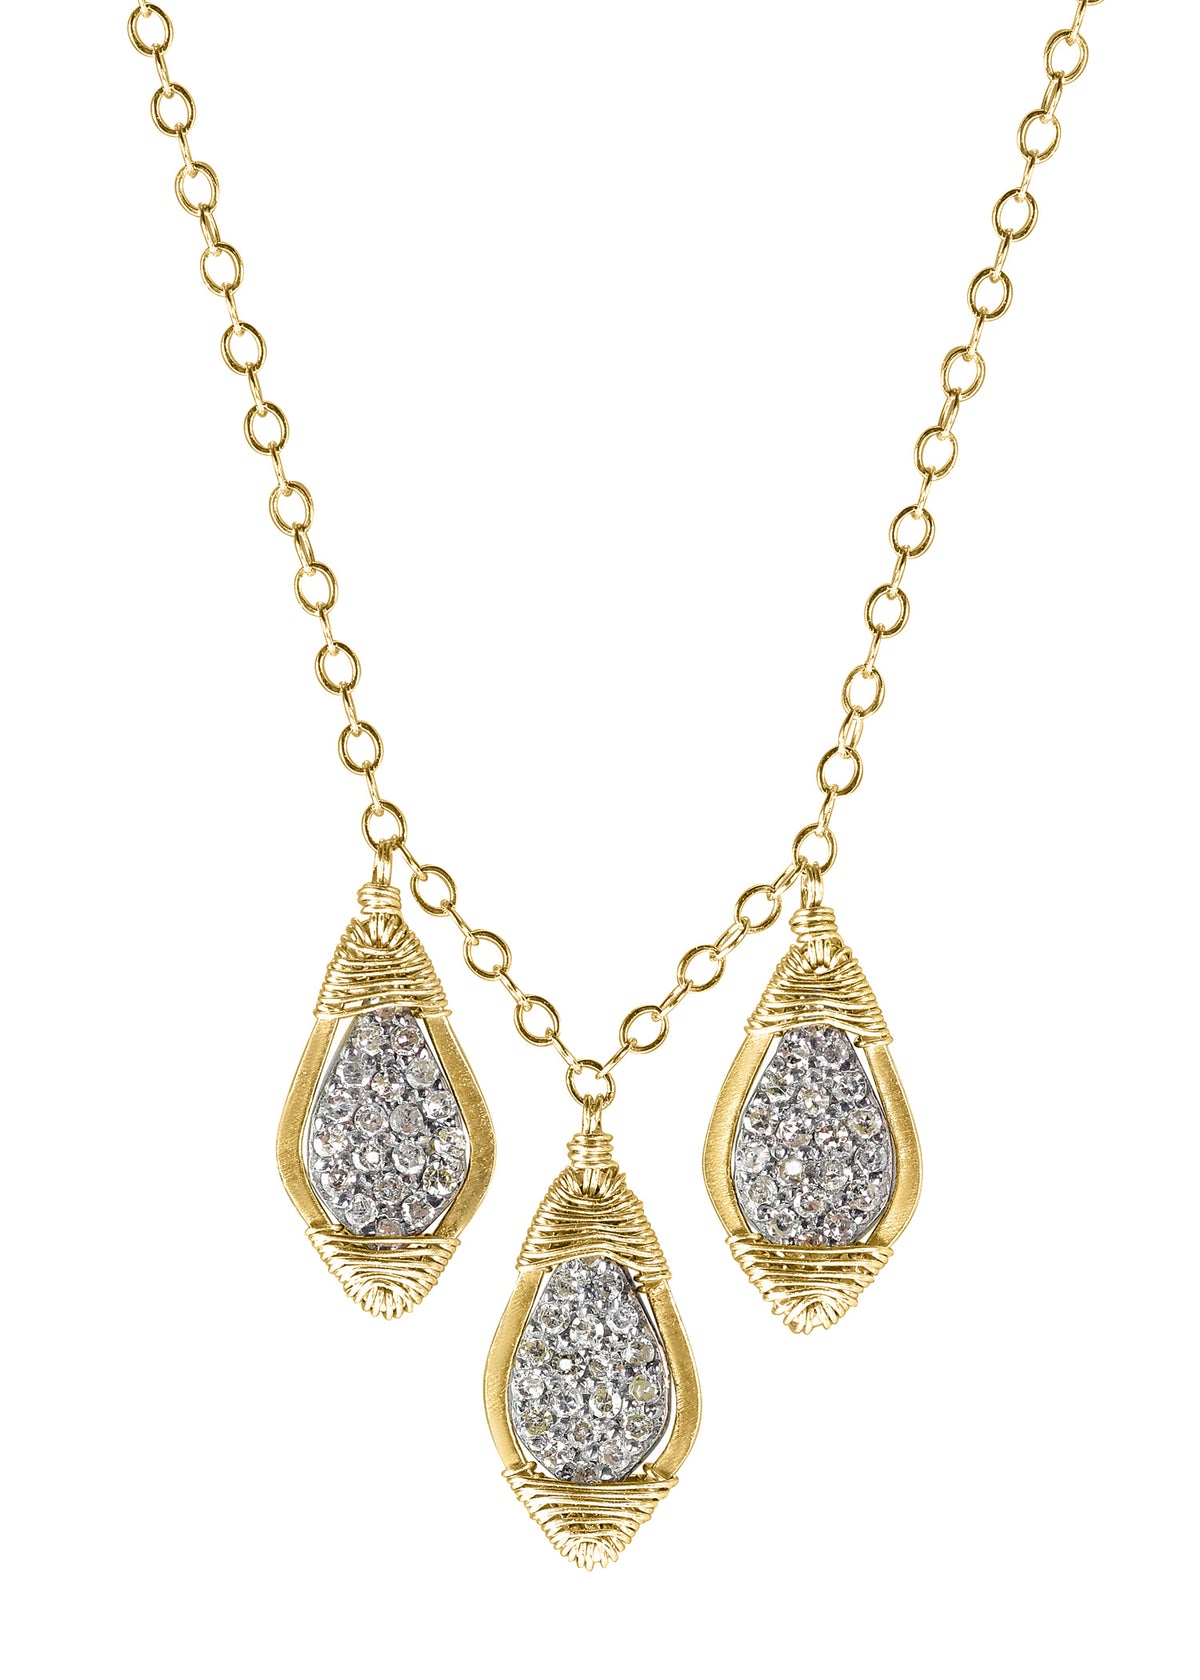 Diamond 14k gold Sterling silver Mixed metal Special order Necklace measures 17-1/4&quot; in length Pendants measure 9/16&quot; in length and 5/16&quot; in width at the widest point (x3) Handmade in our Los Angeles studio